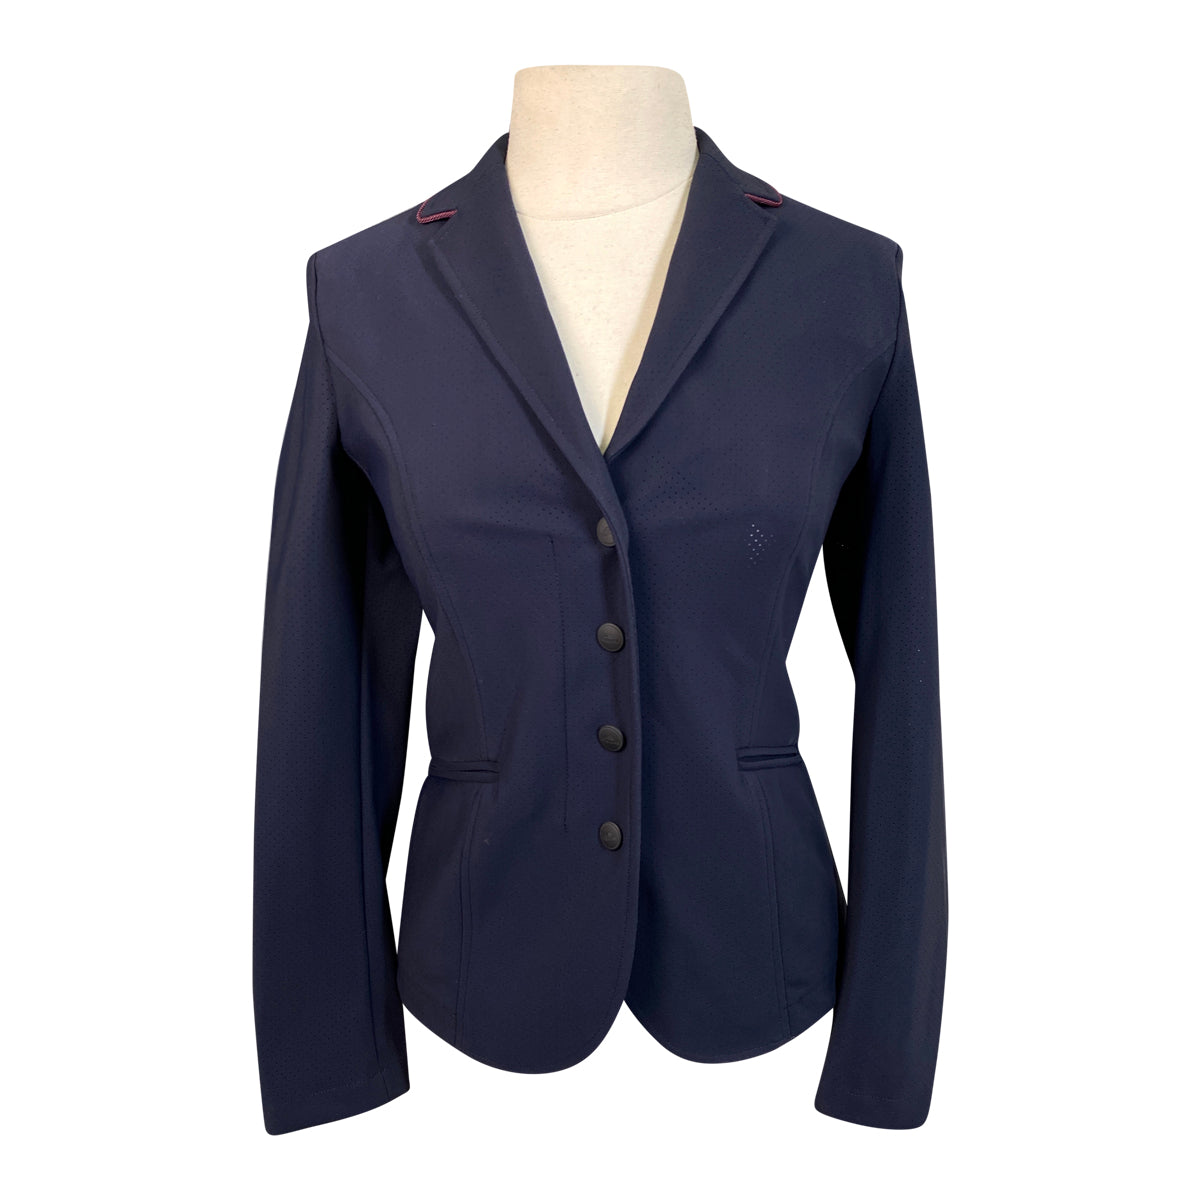 Equiline 'CozyC' Competition Jacket in Navy